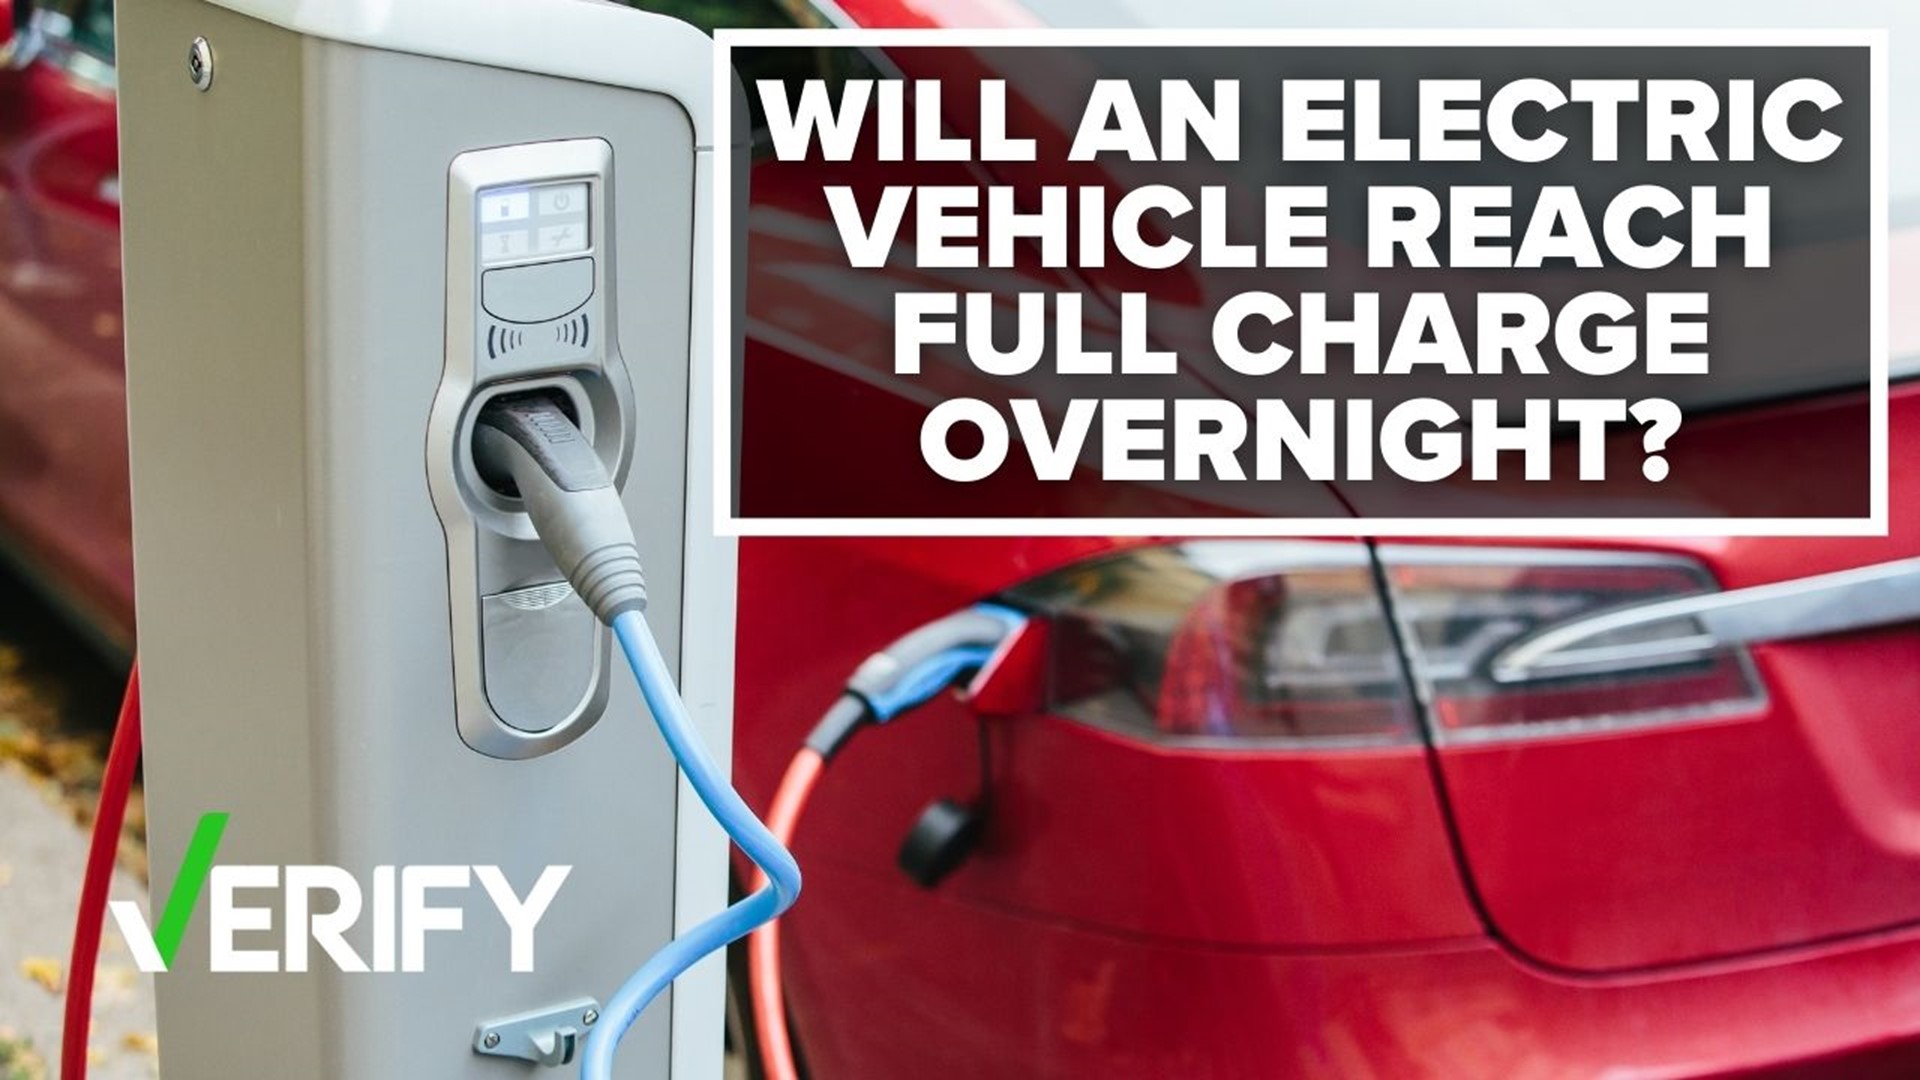 There are three types of chargers for electric vehicles, and the make of car can determine how quickly they charge.